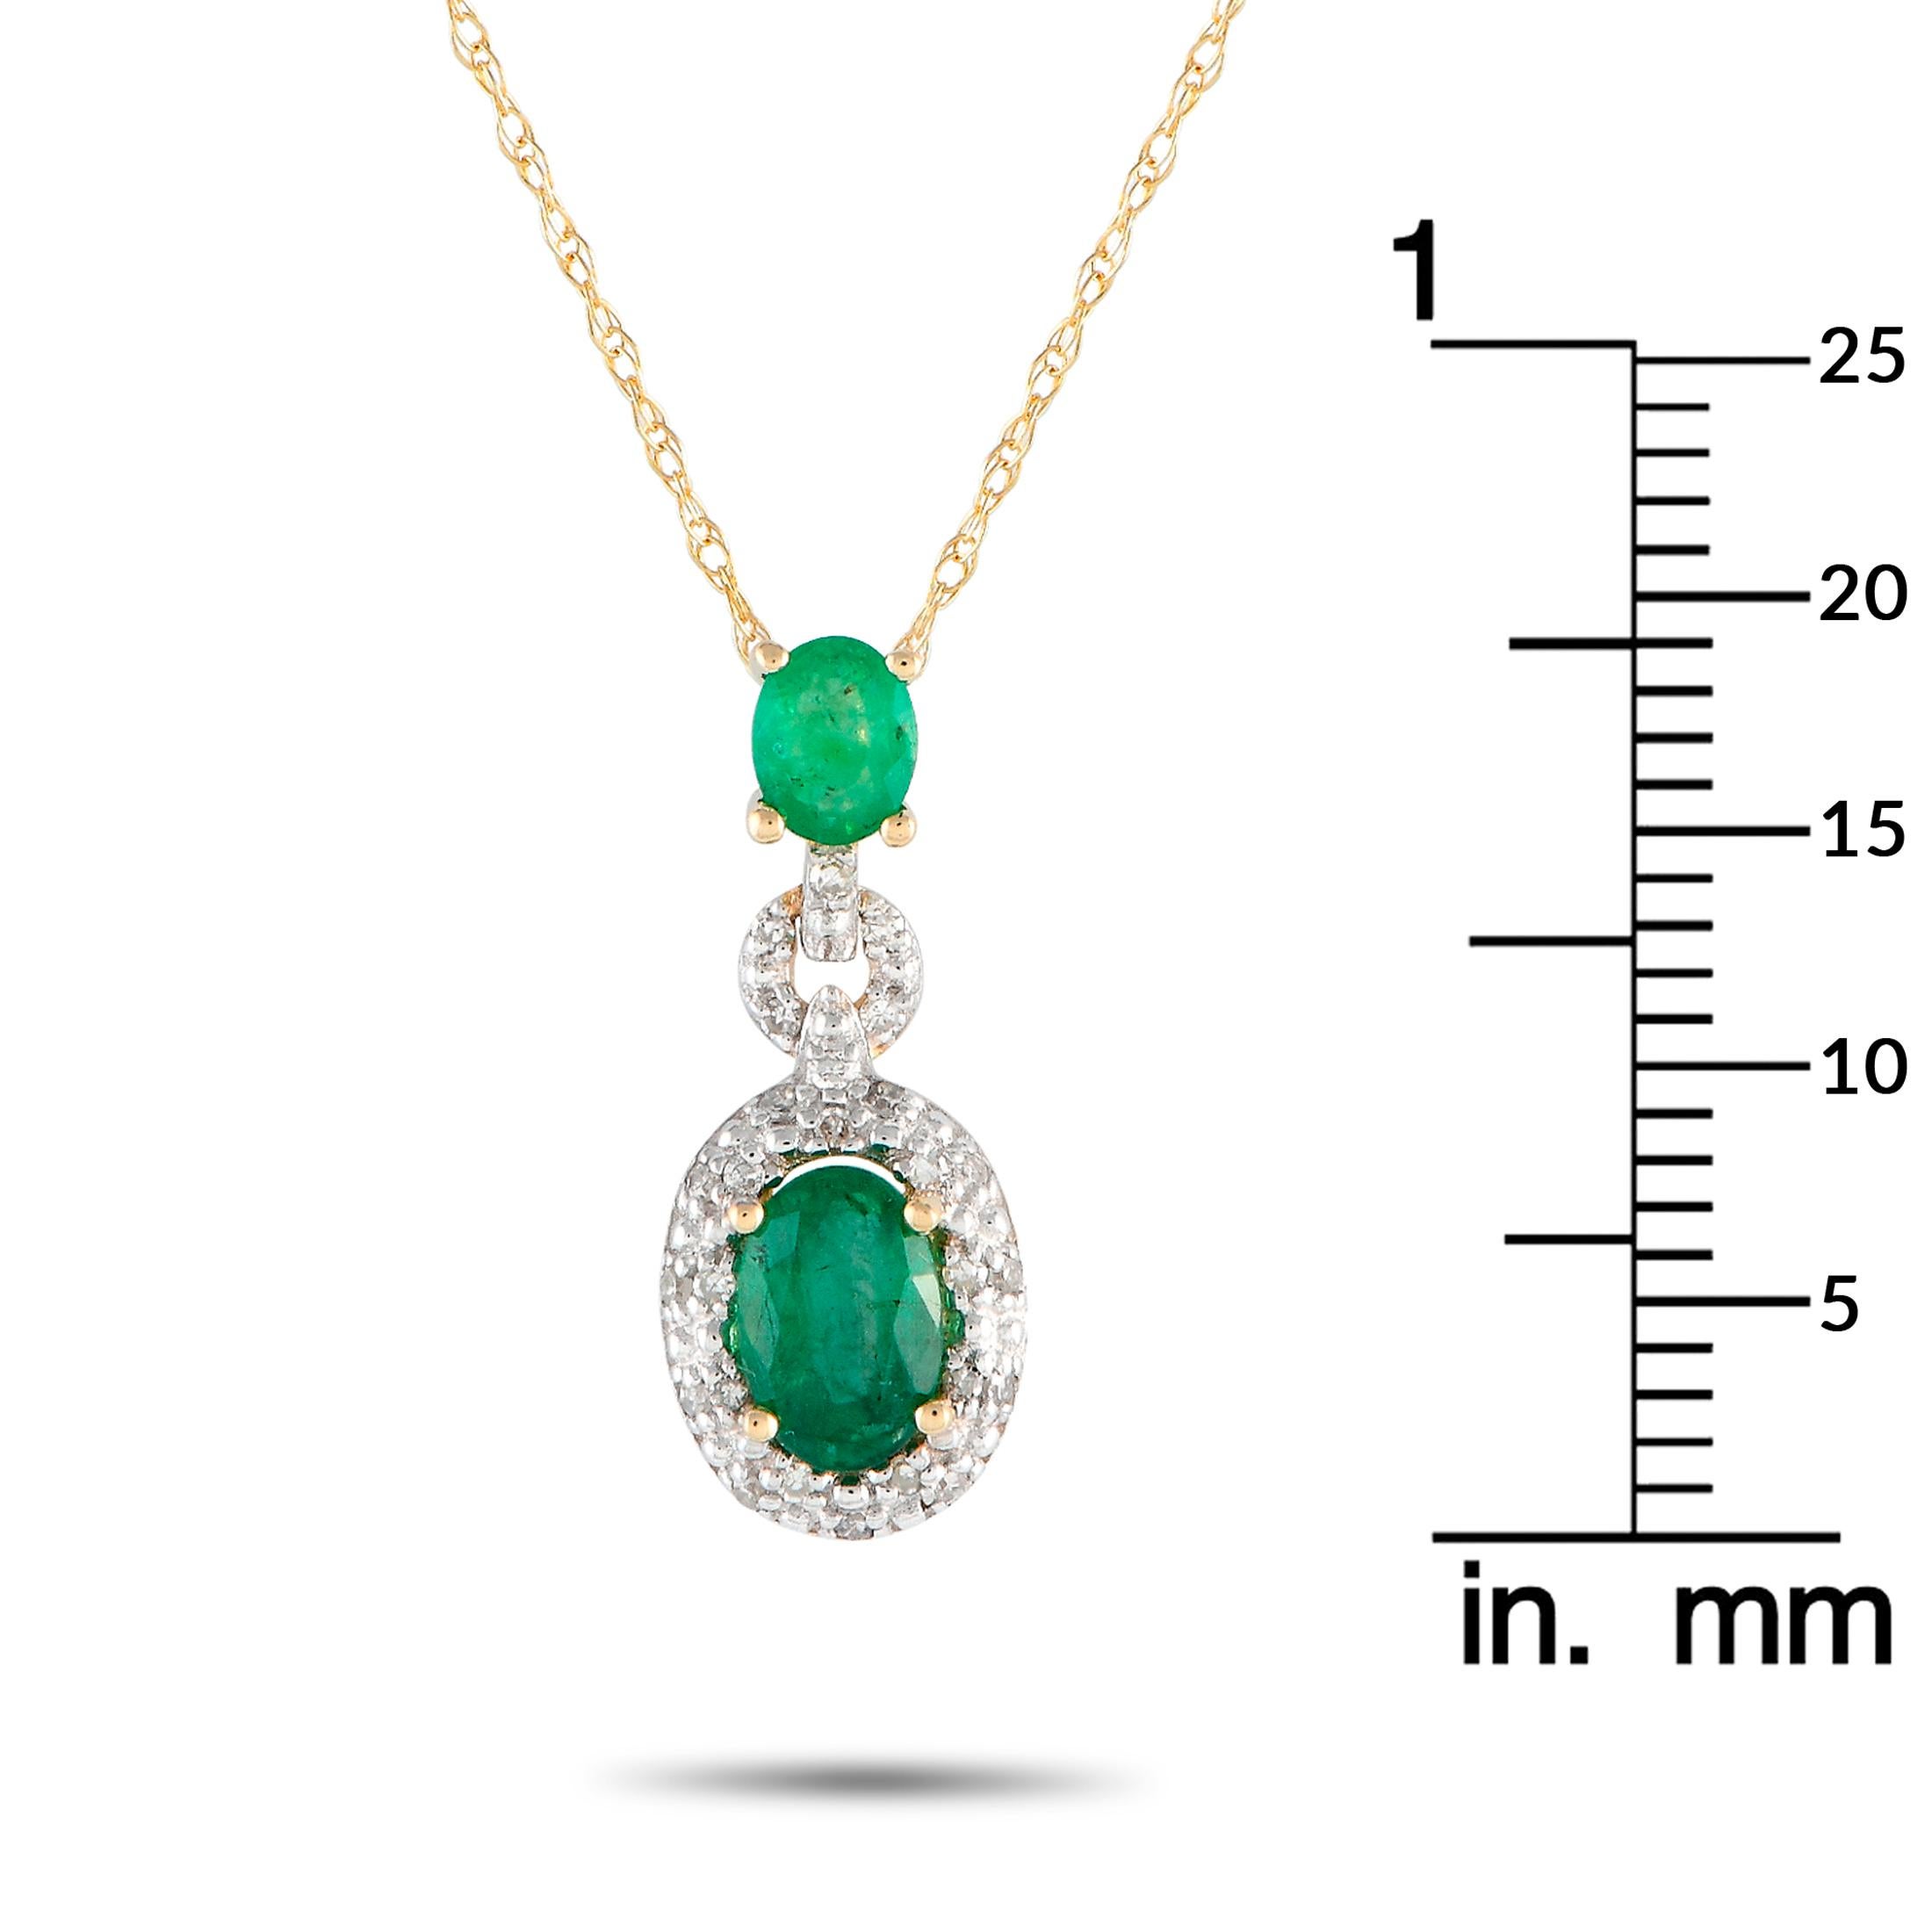 LB Exclusive 14K Yellow Gold 0.08ct Diamond and Emerald Necklace PD4-16183YEM In New Condition For Sale In Southampton, PA